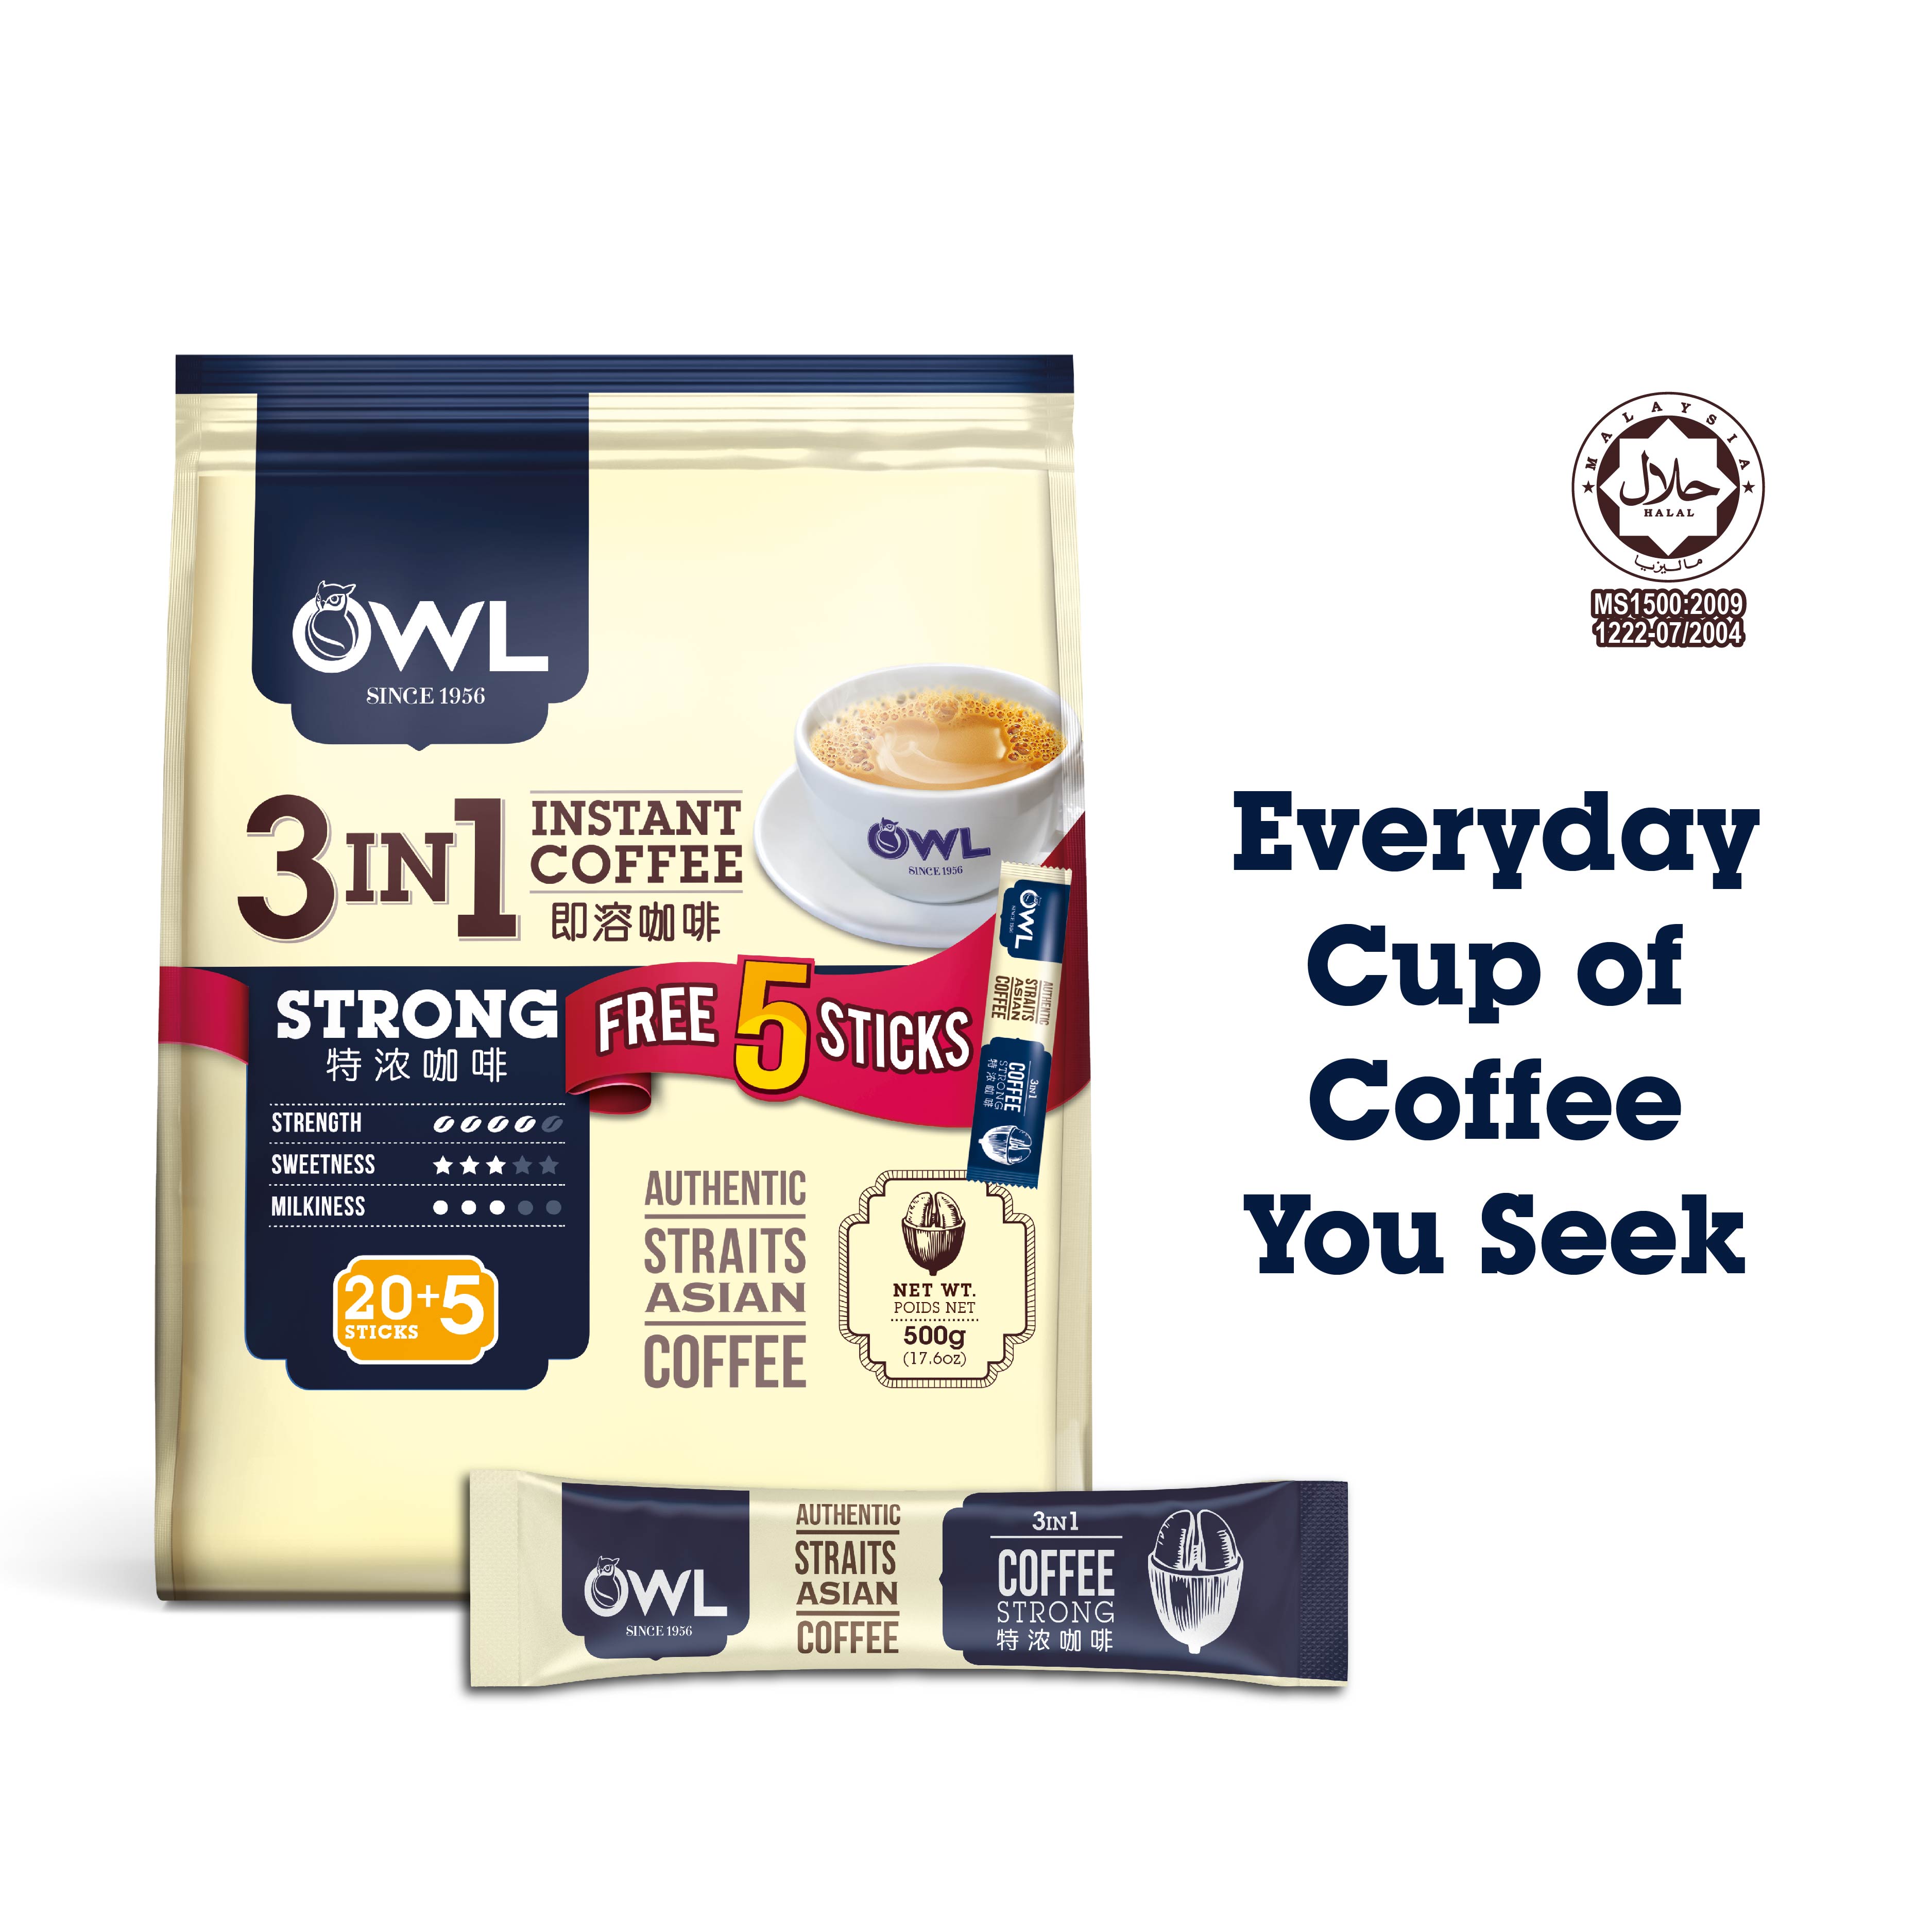 OWL 3in1 Instant Coffee Strong, 25 sticks